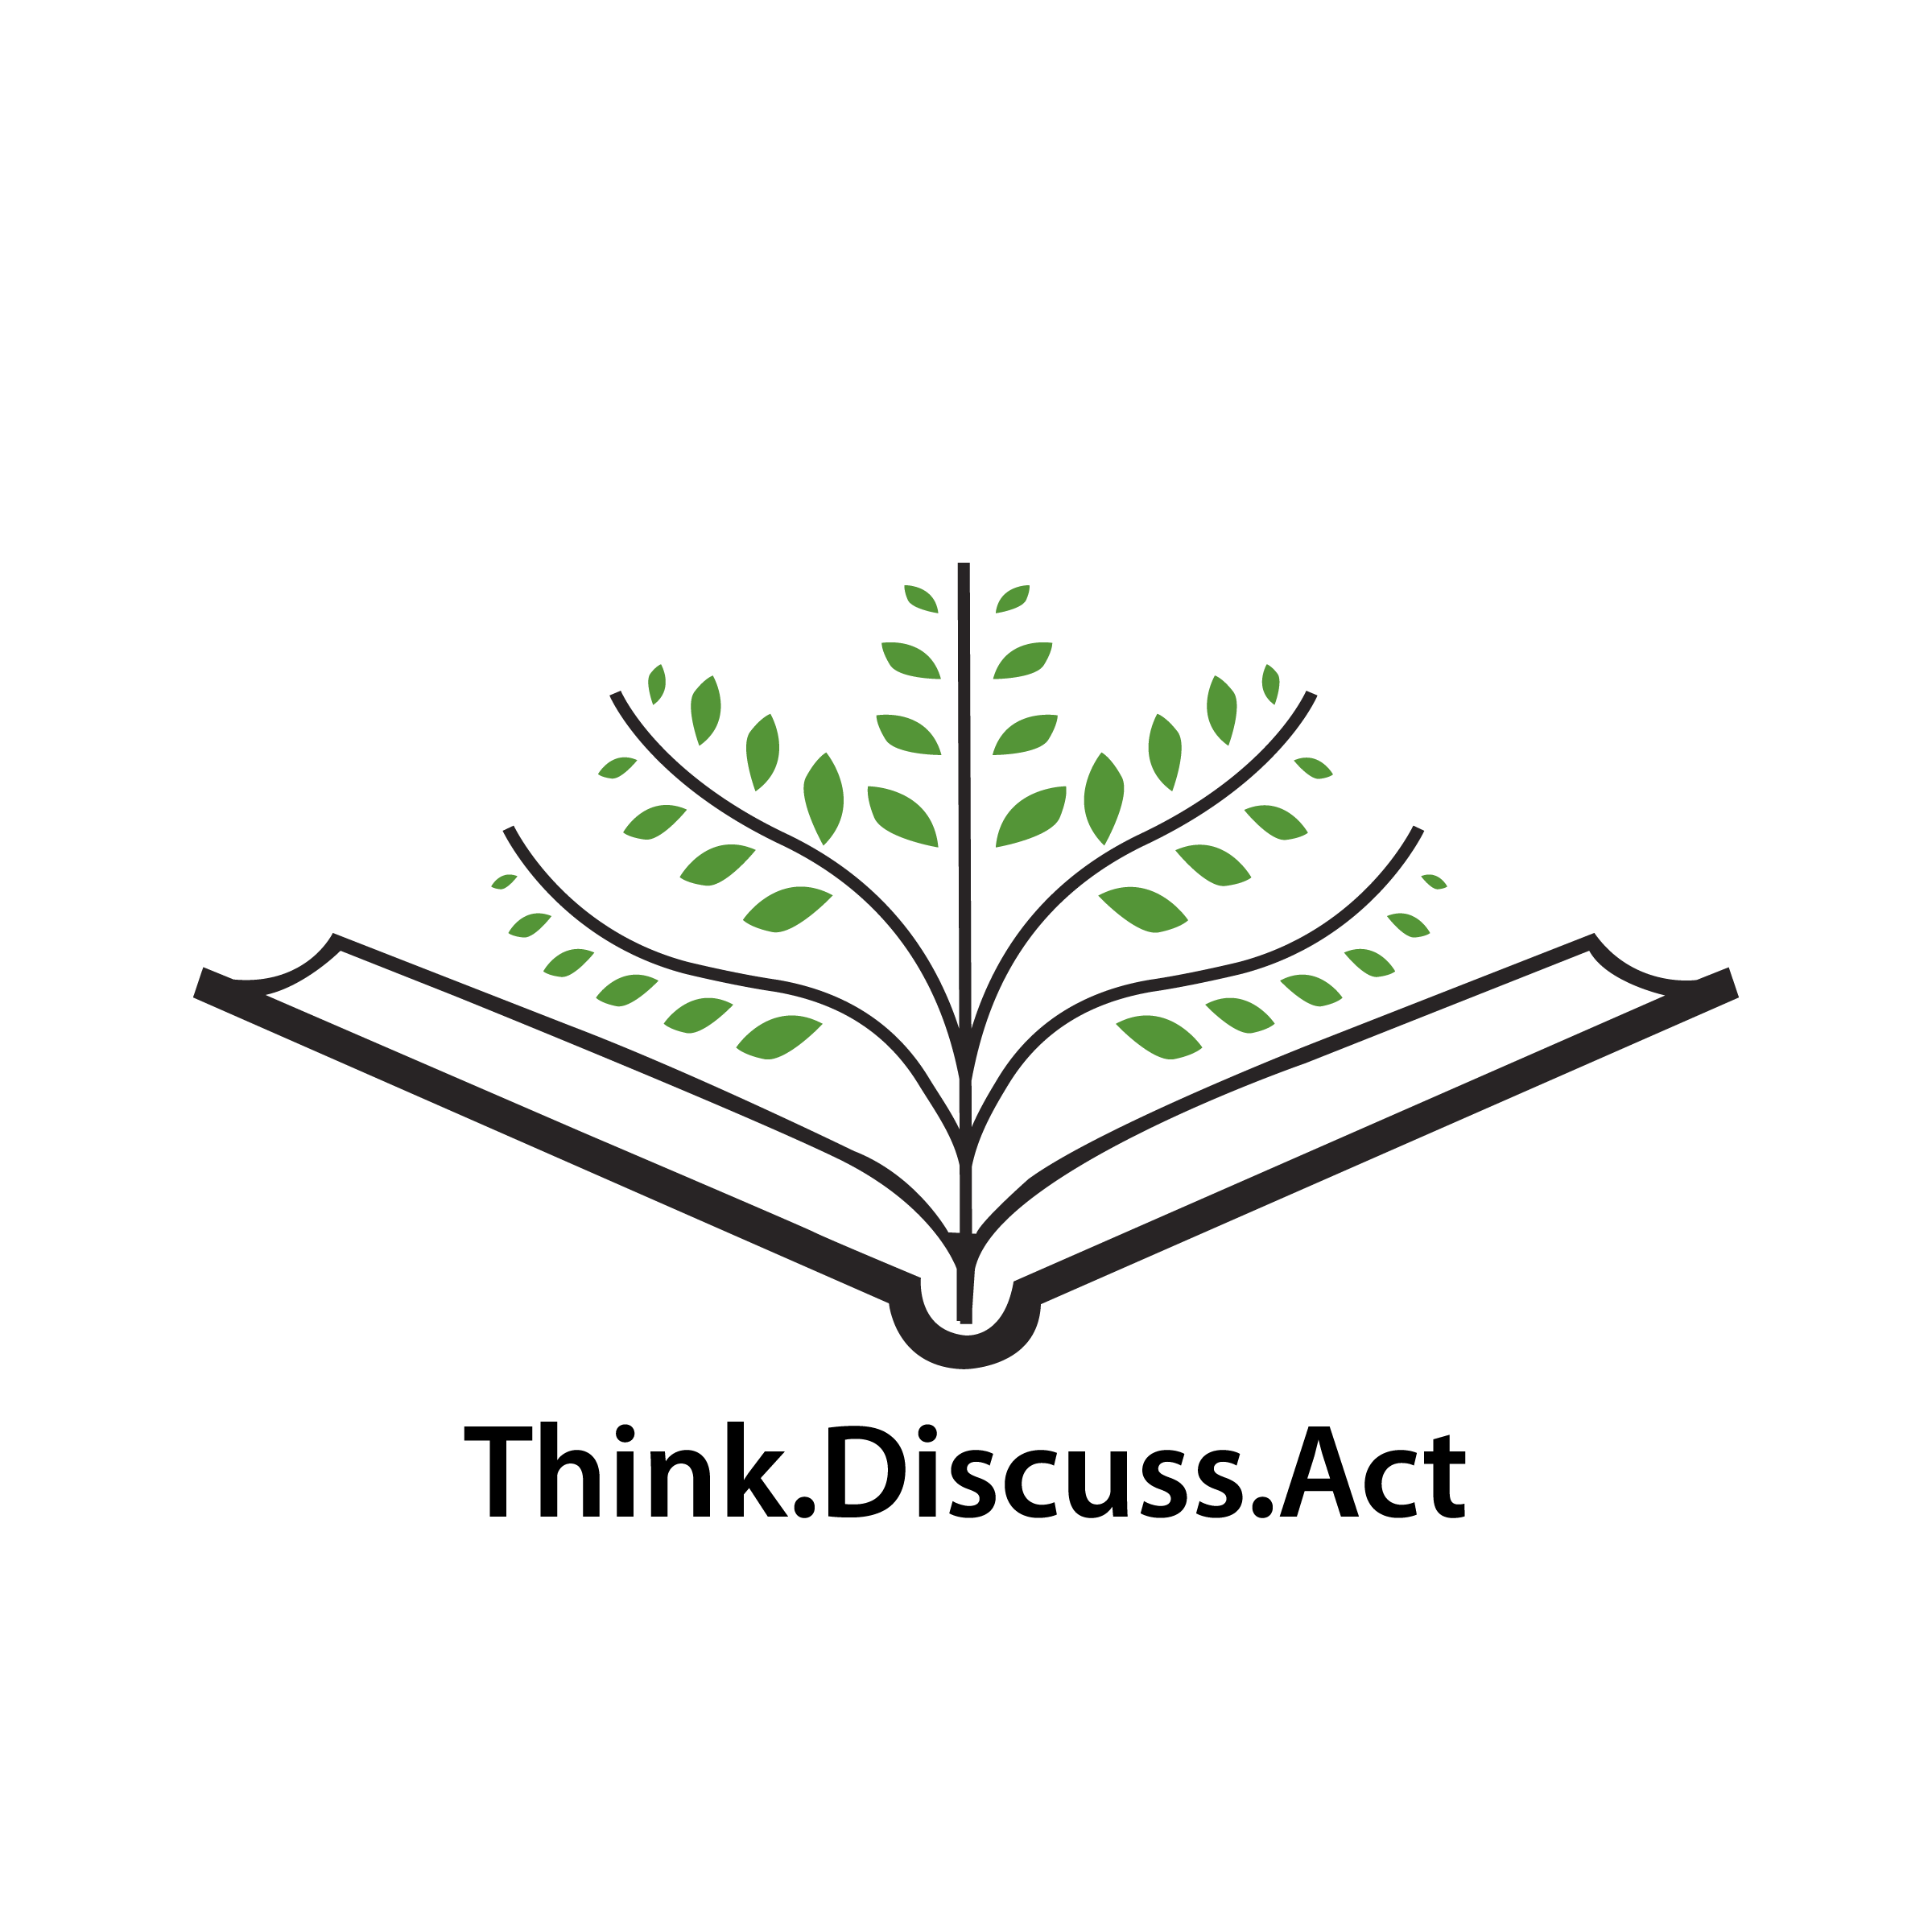 NPC logo of tree springing from an open book